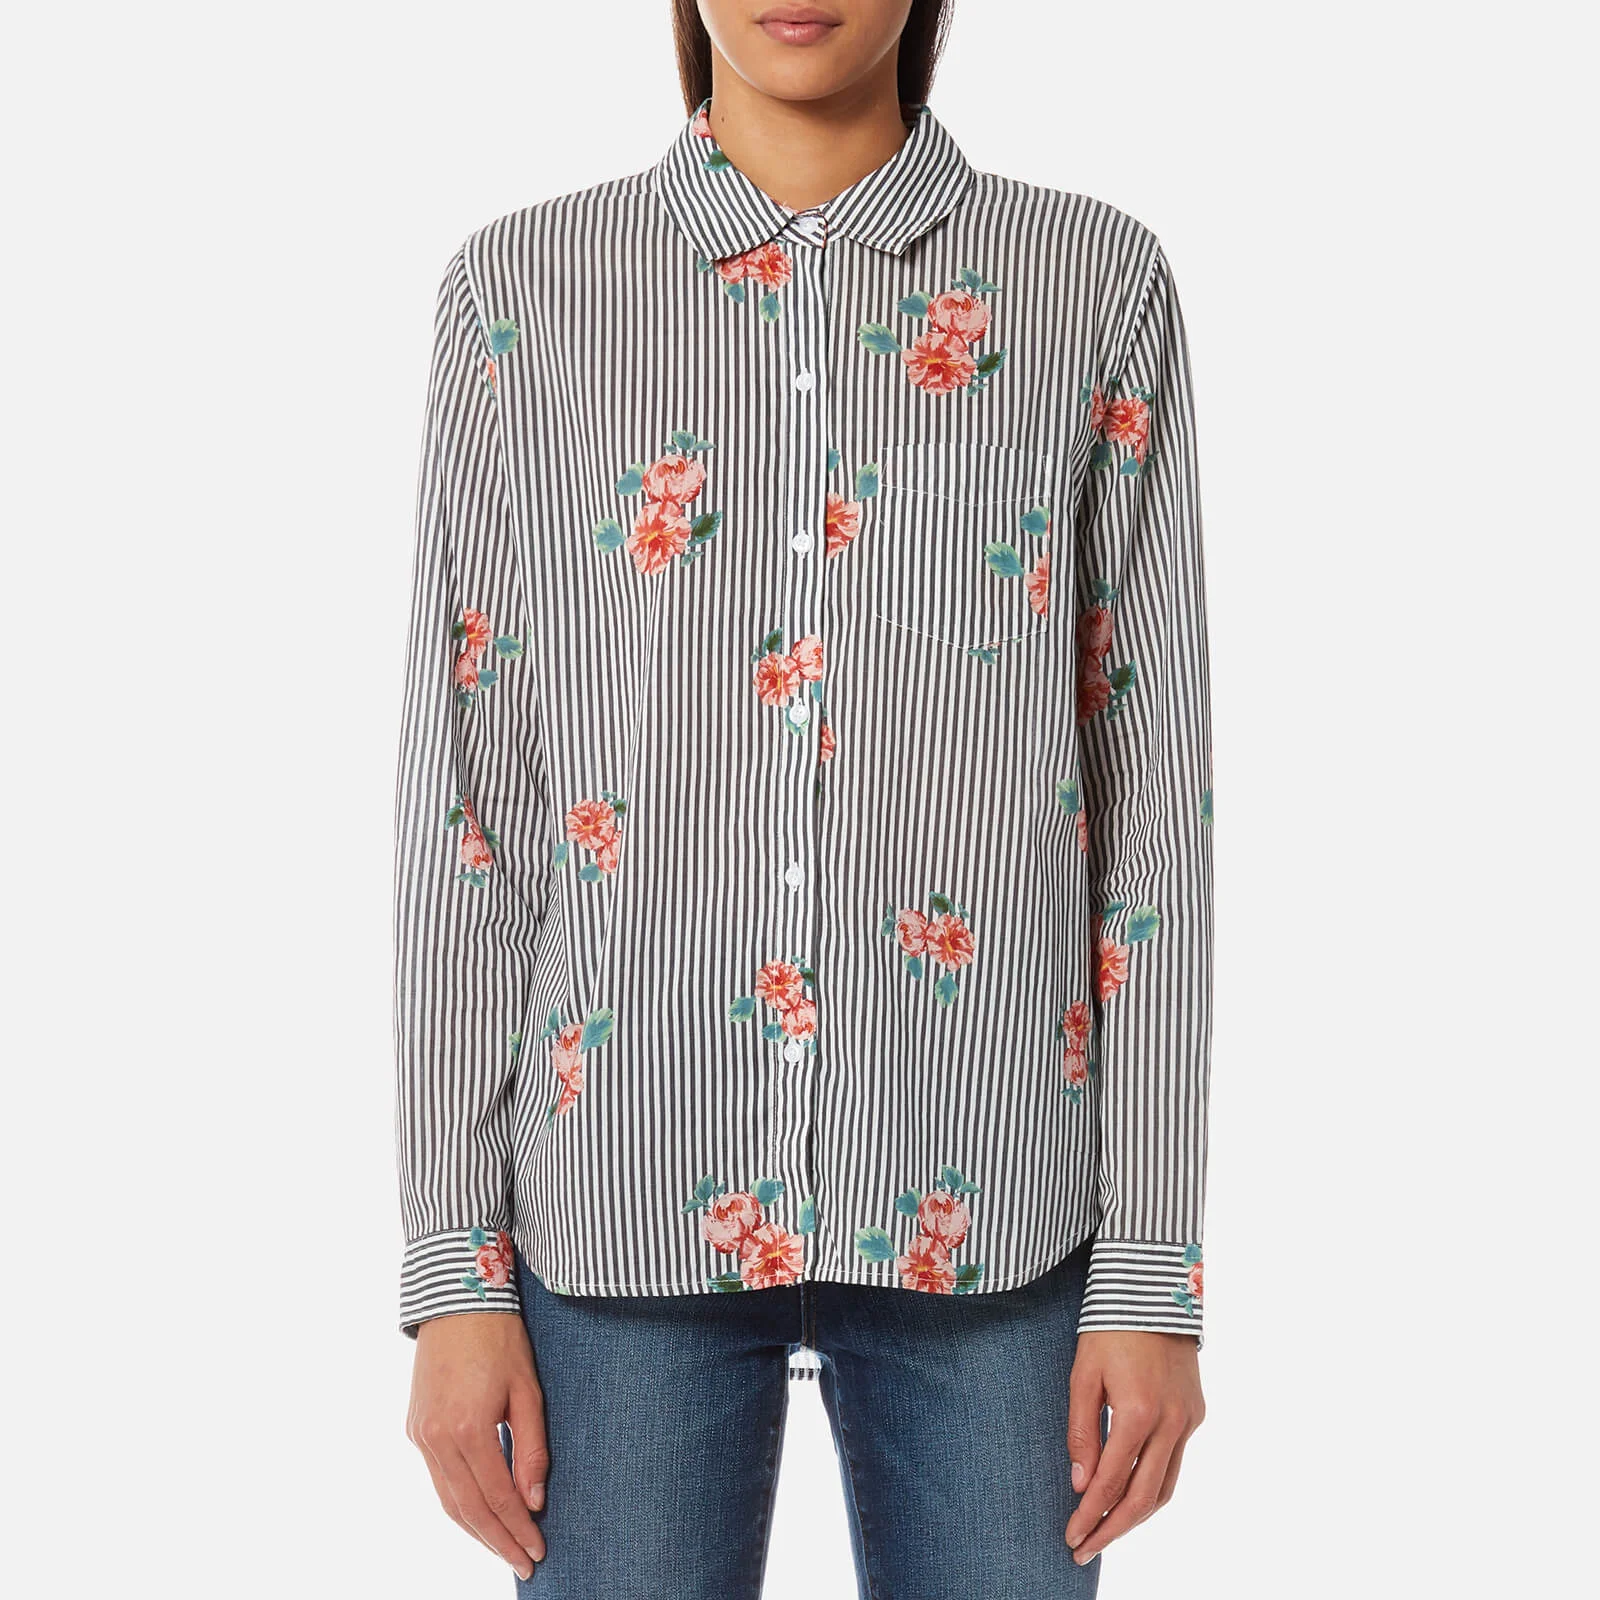 Rails Women's Taylor Shirt with Flowers - Florence Stripe Image 1